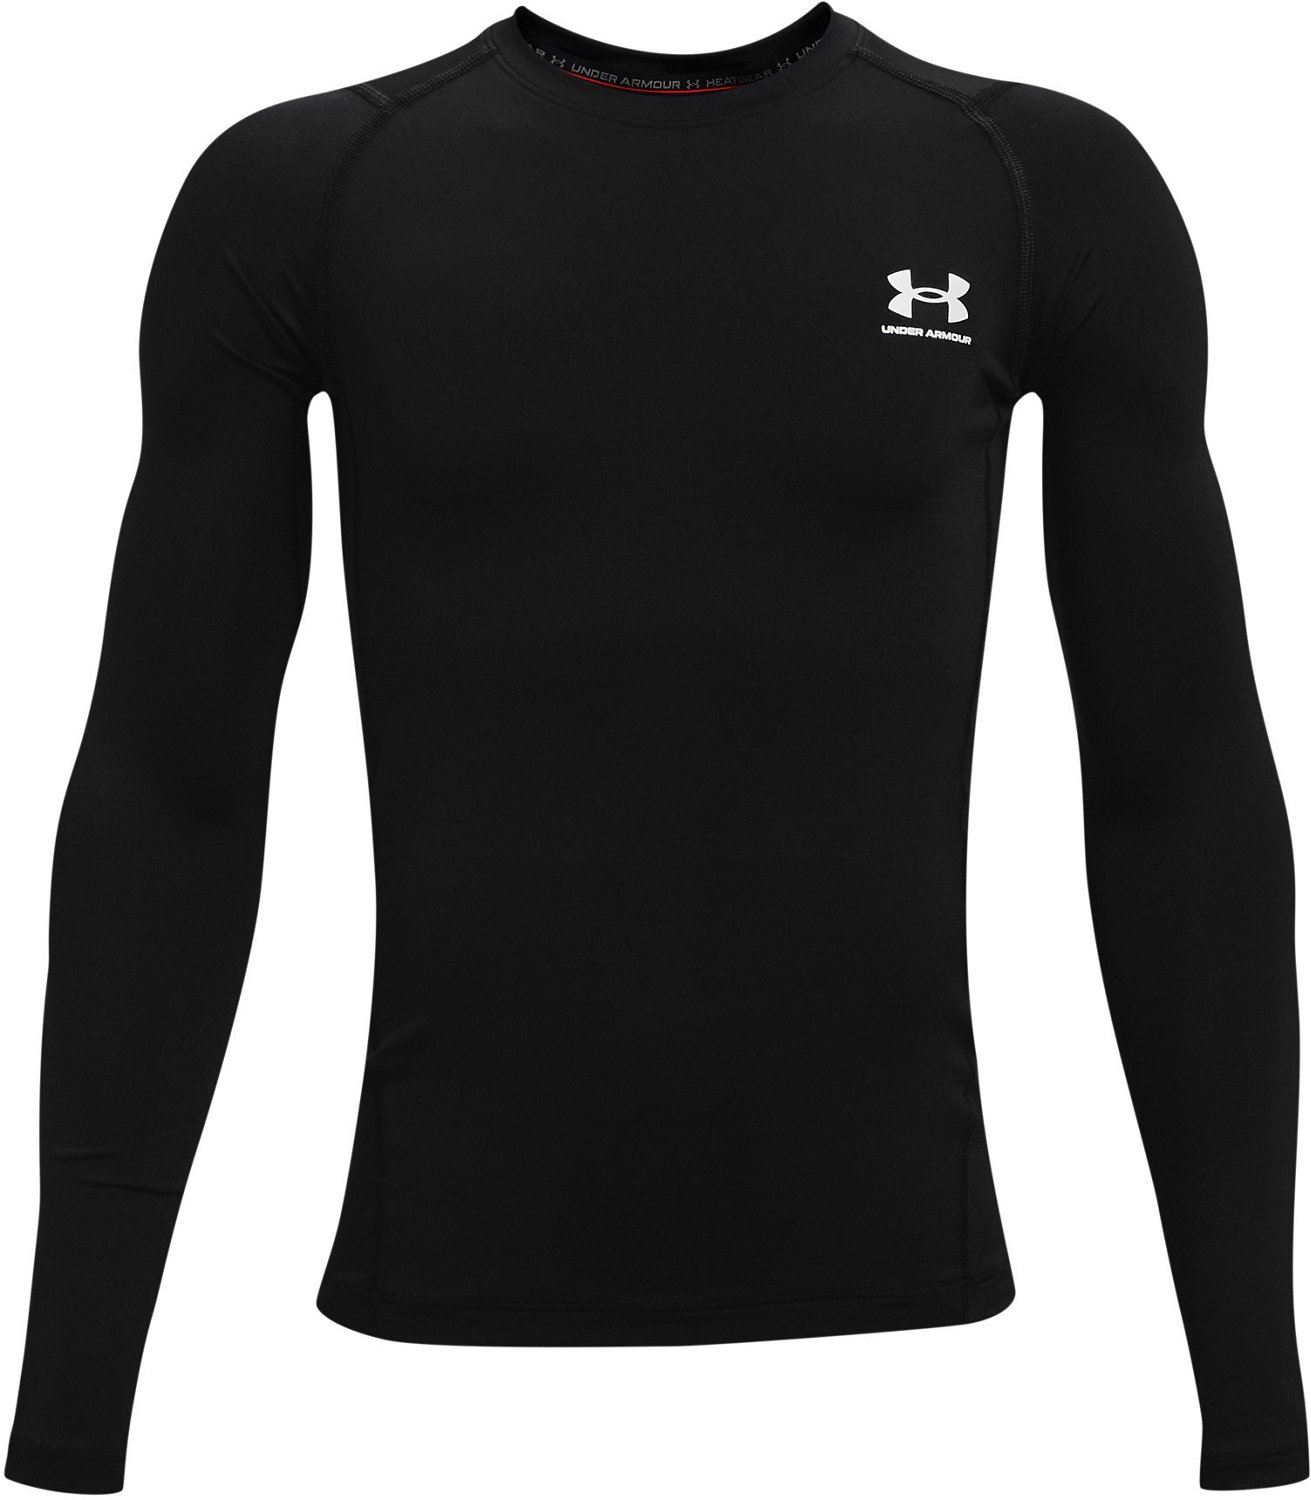 HOPLYNN Youth Boy's Compression Shirts, Long Sleeve Quick Dry Cold